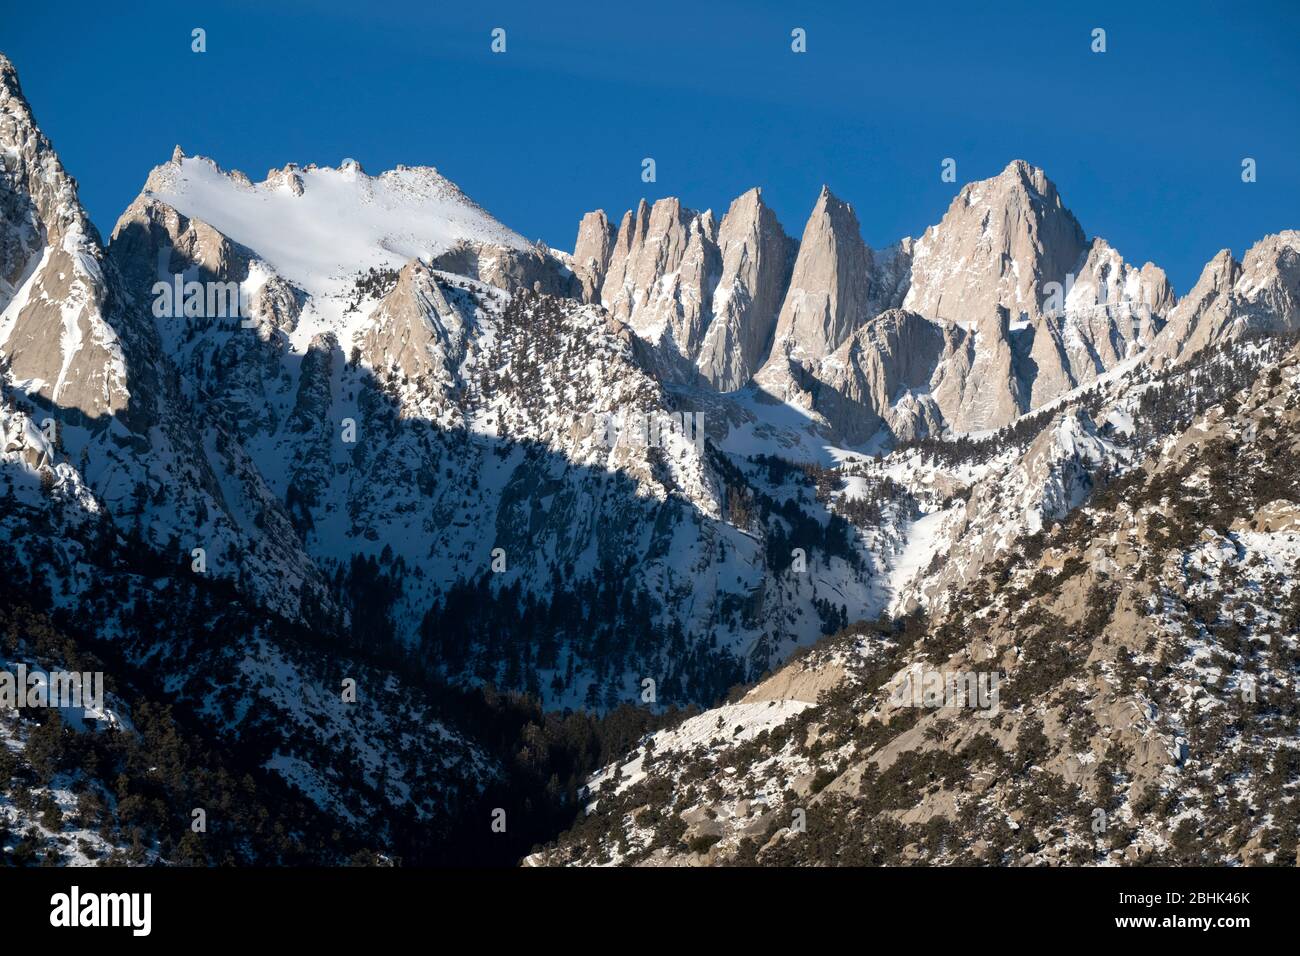 View of the tallest mountain in the continental United States, Mt. Whitney, viewed from the Owens Valley in Inyo County, California Stock Photo